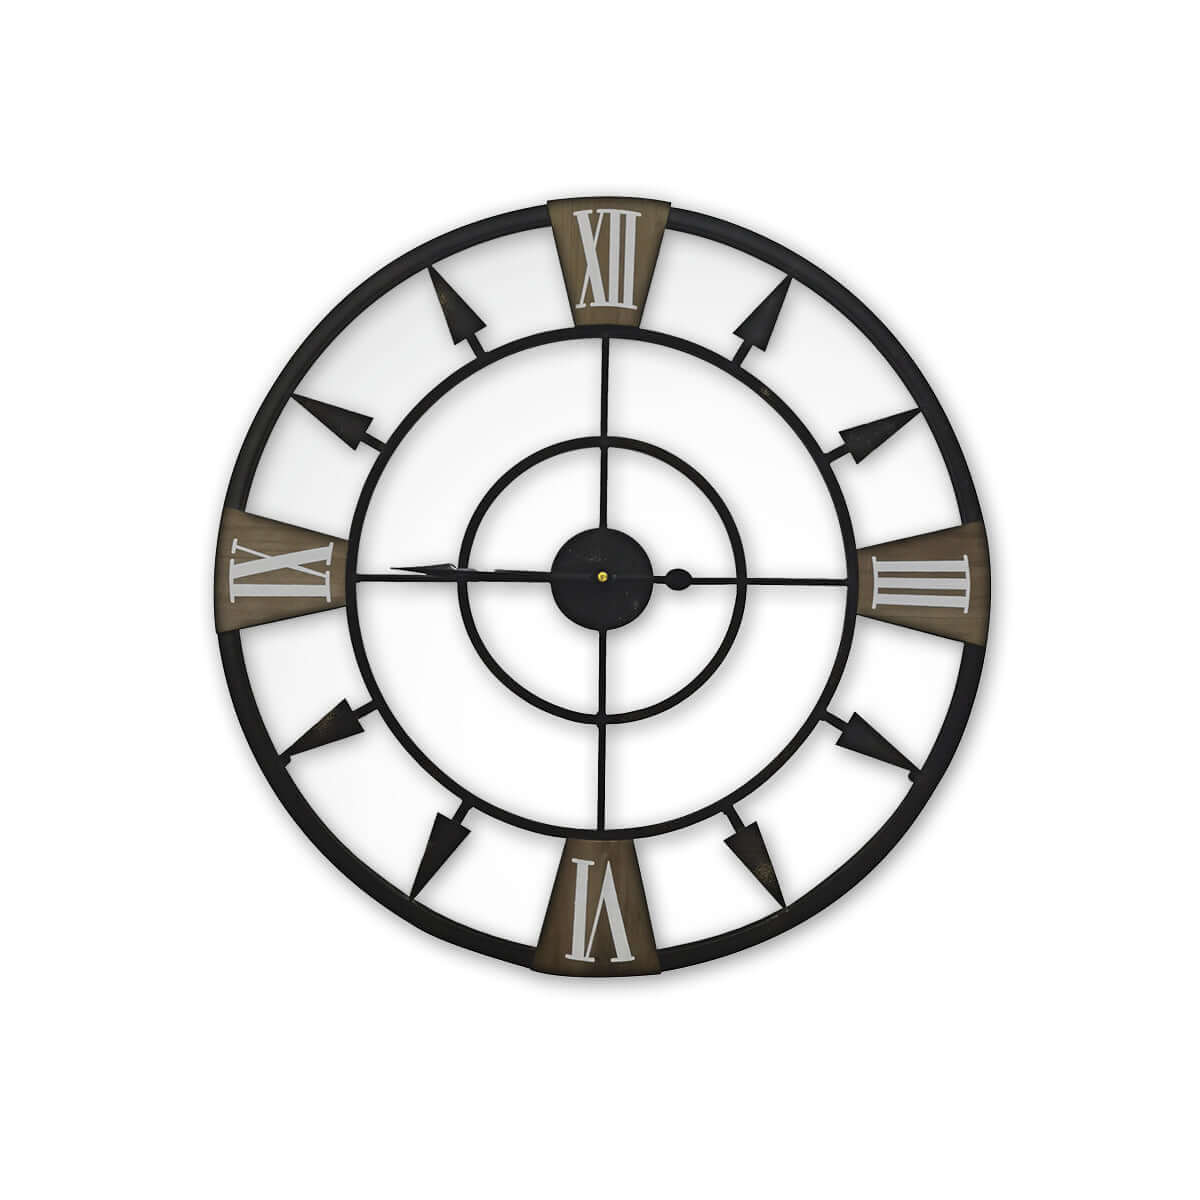 Home Master Wall Clock Antique Style Roman Numerals Metal Accents 60cm-Upinteriors